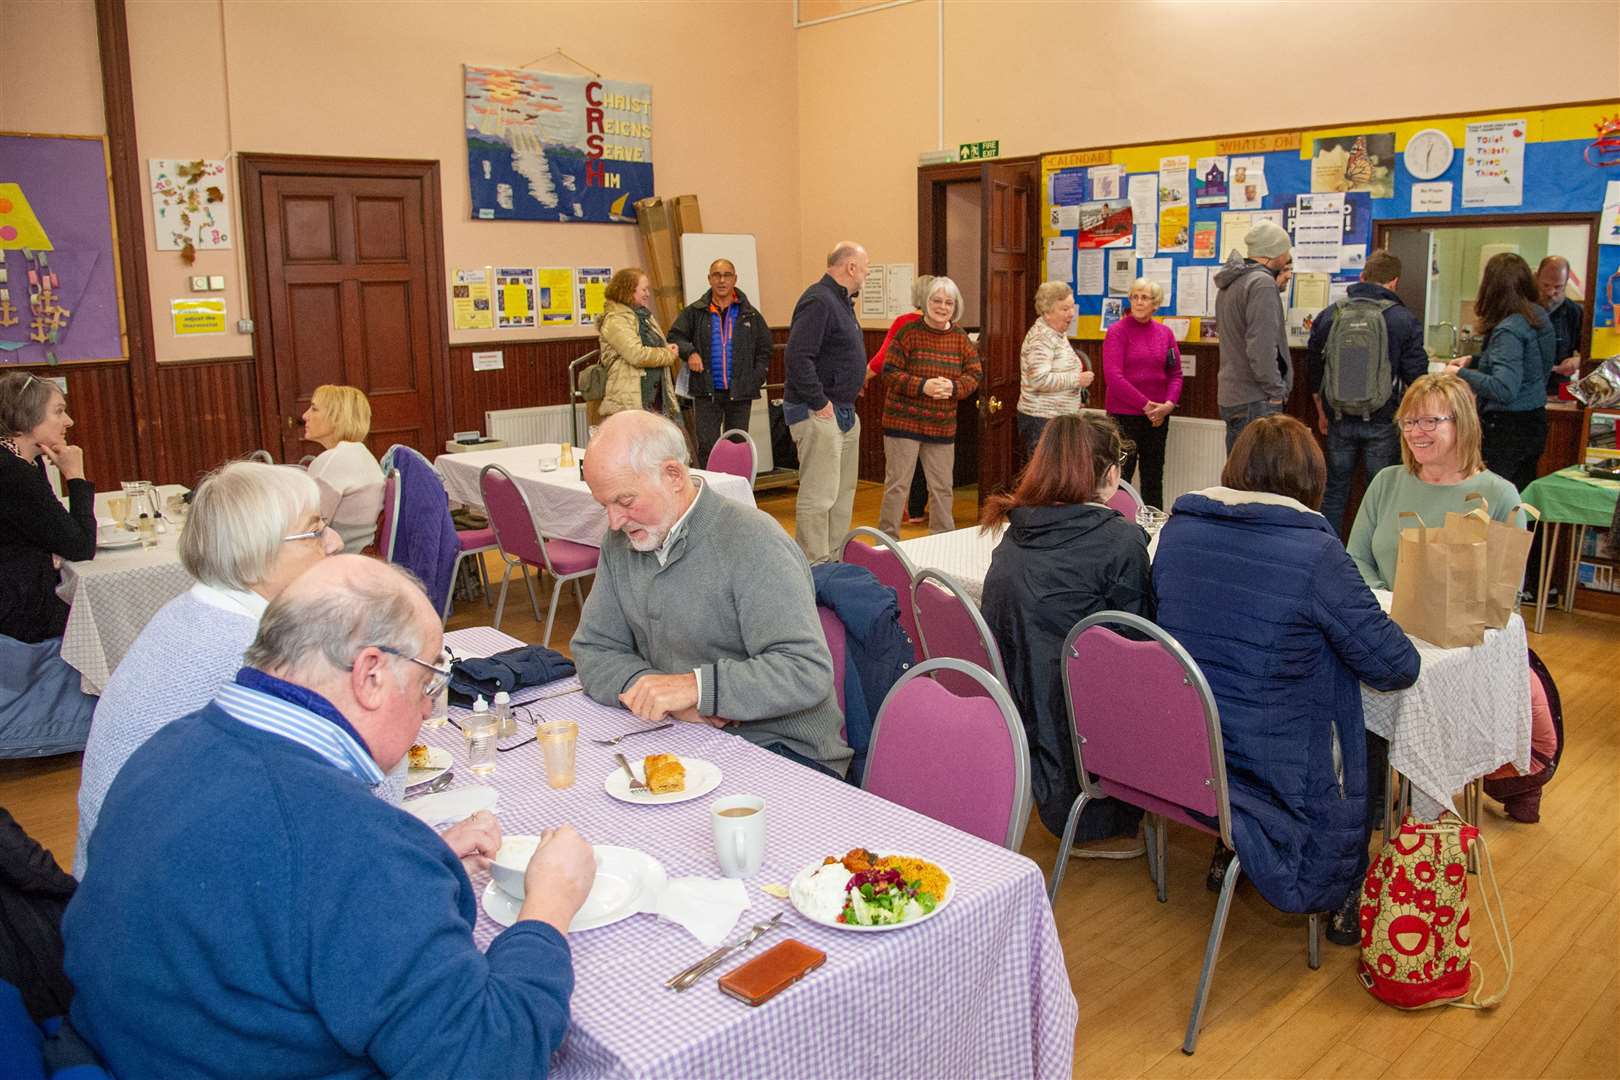 A busy lunchtime at St Leonard's Church Hall.